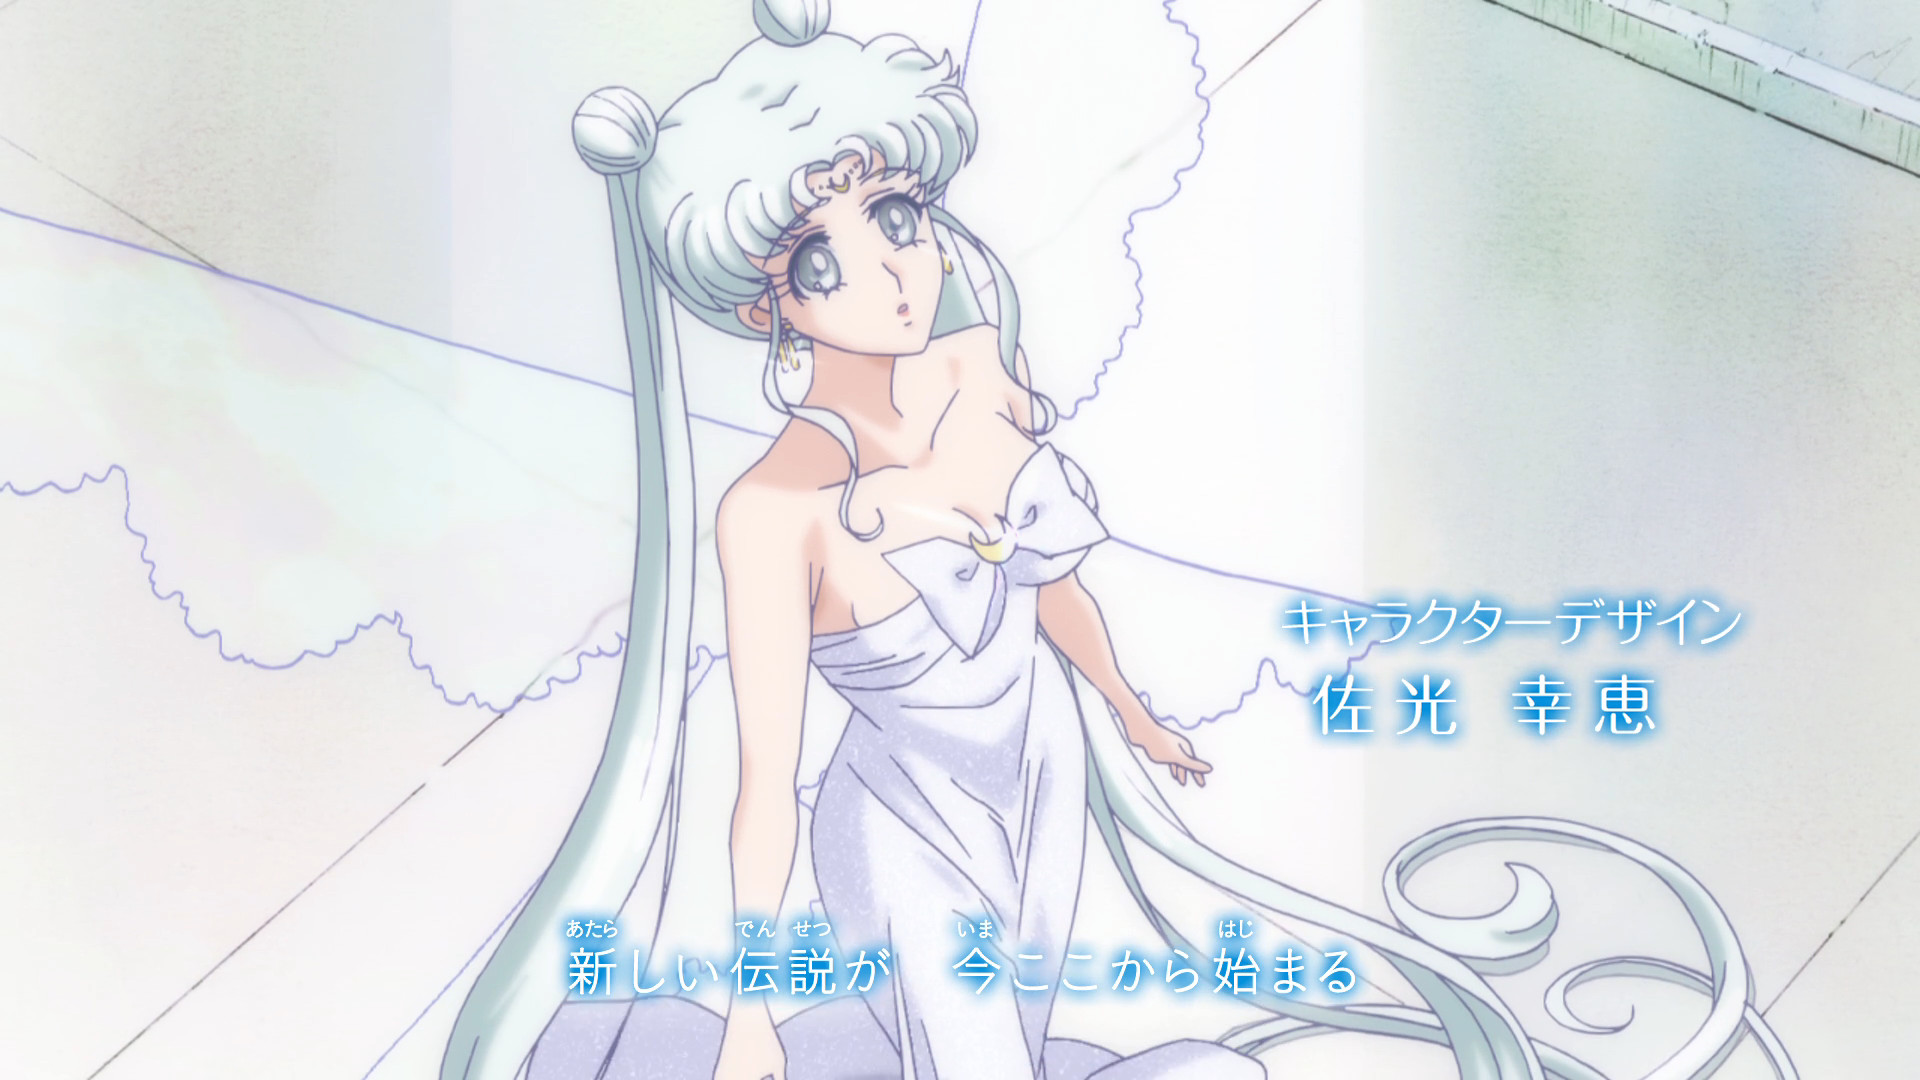 Sailor Moon intro - Queen Serenity with white hair.